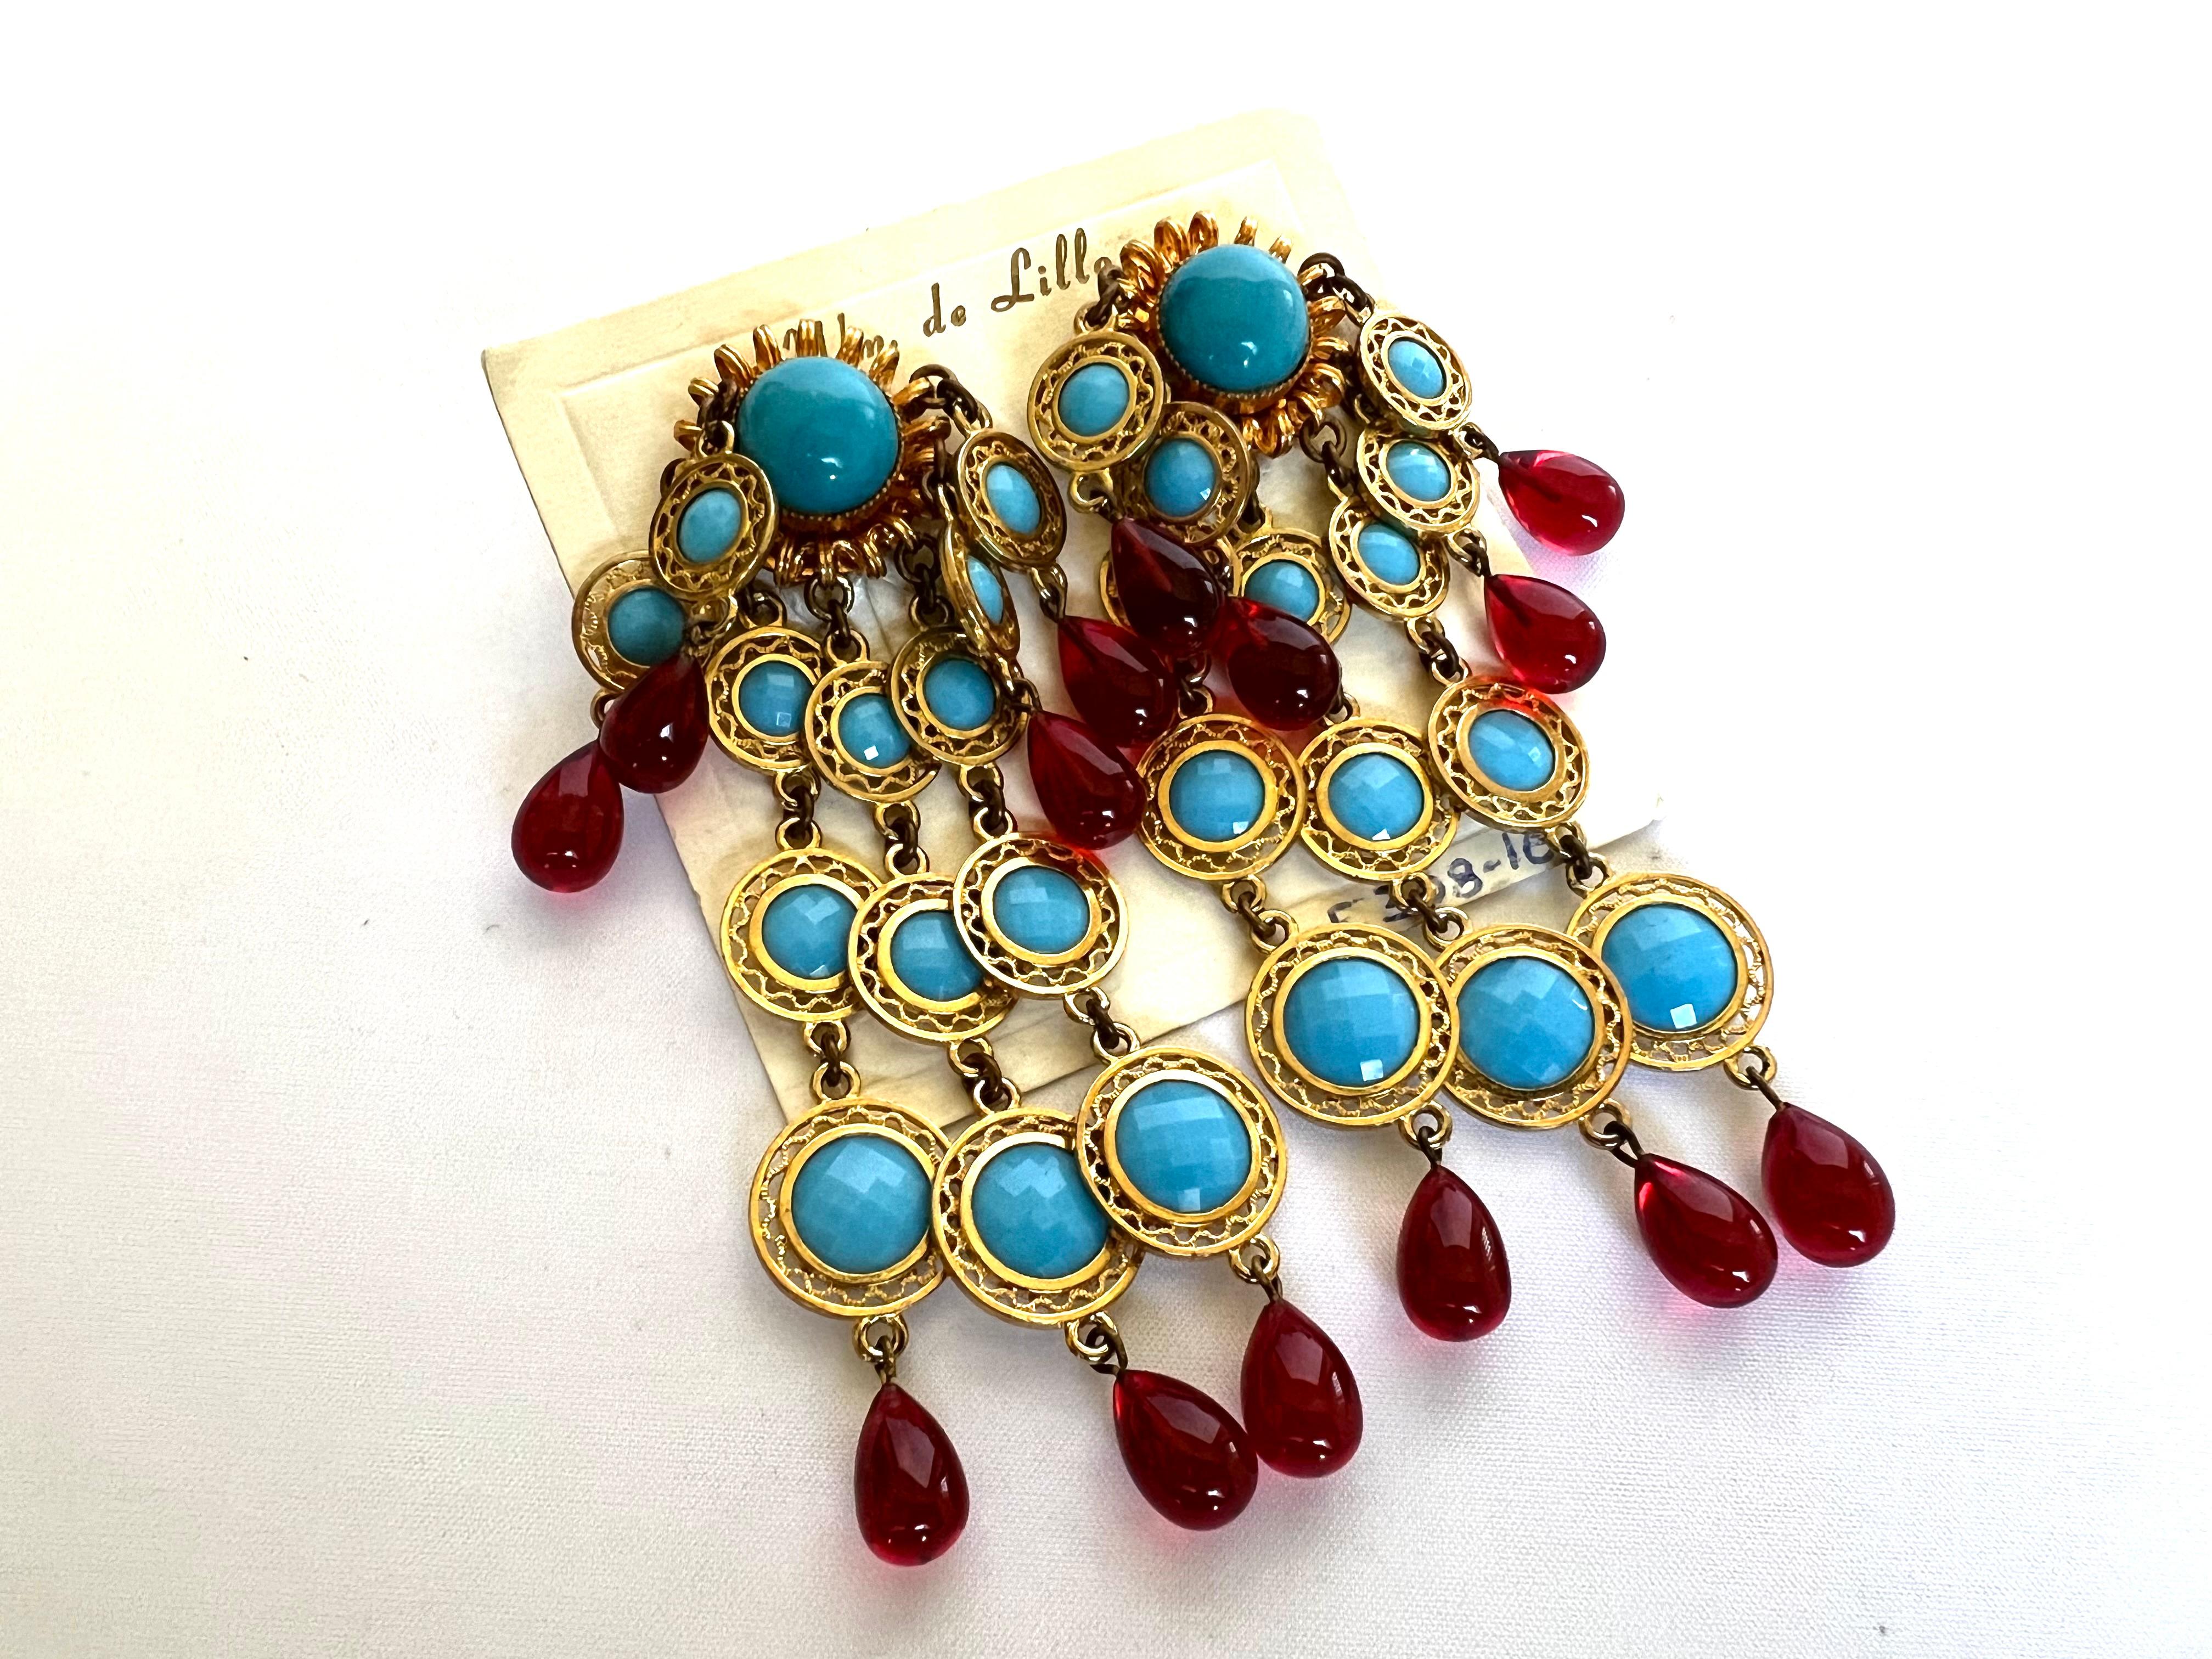 Vintage Faux Ruby and Turquoise Chandelier Earrings by William de Lillo  In Excellent Condition For Sale In Palm Springs, CA